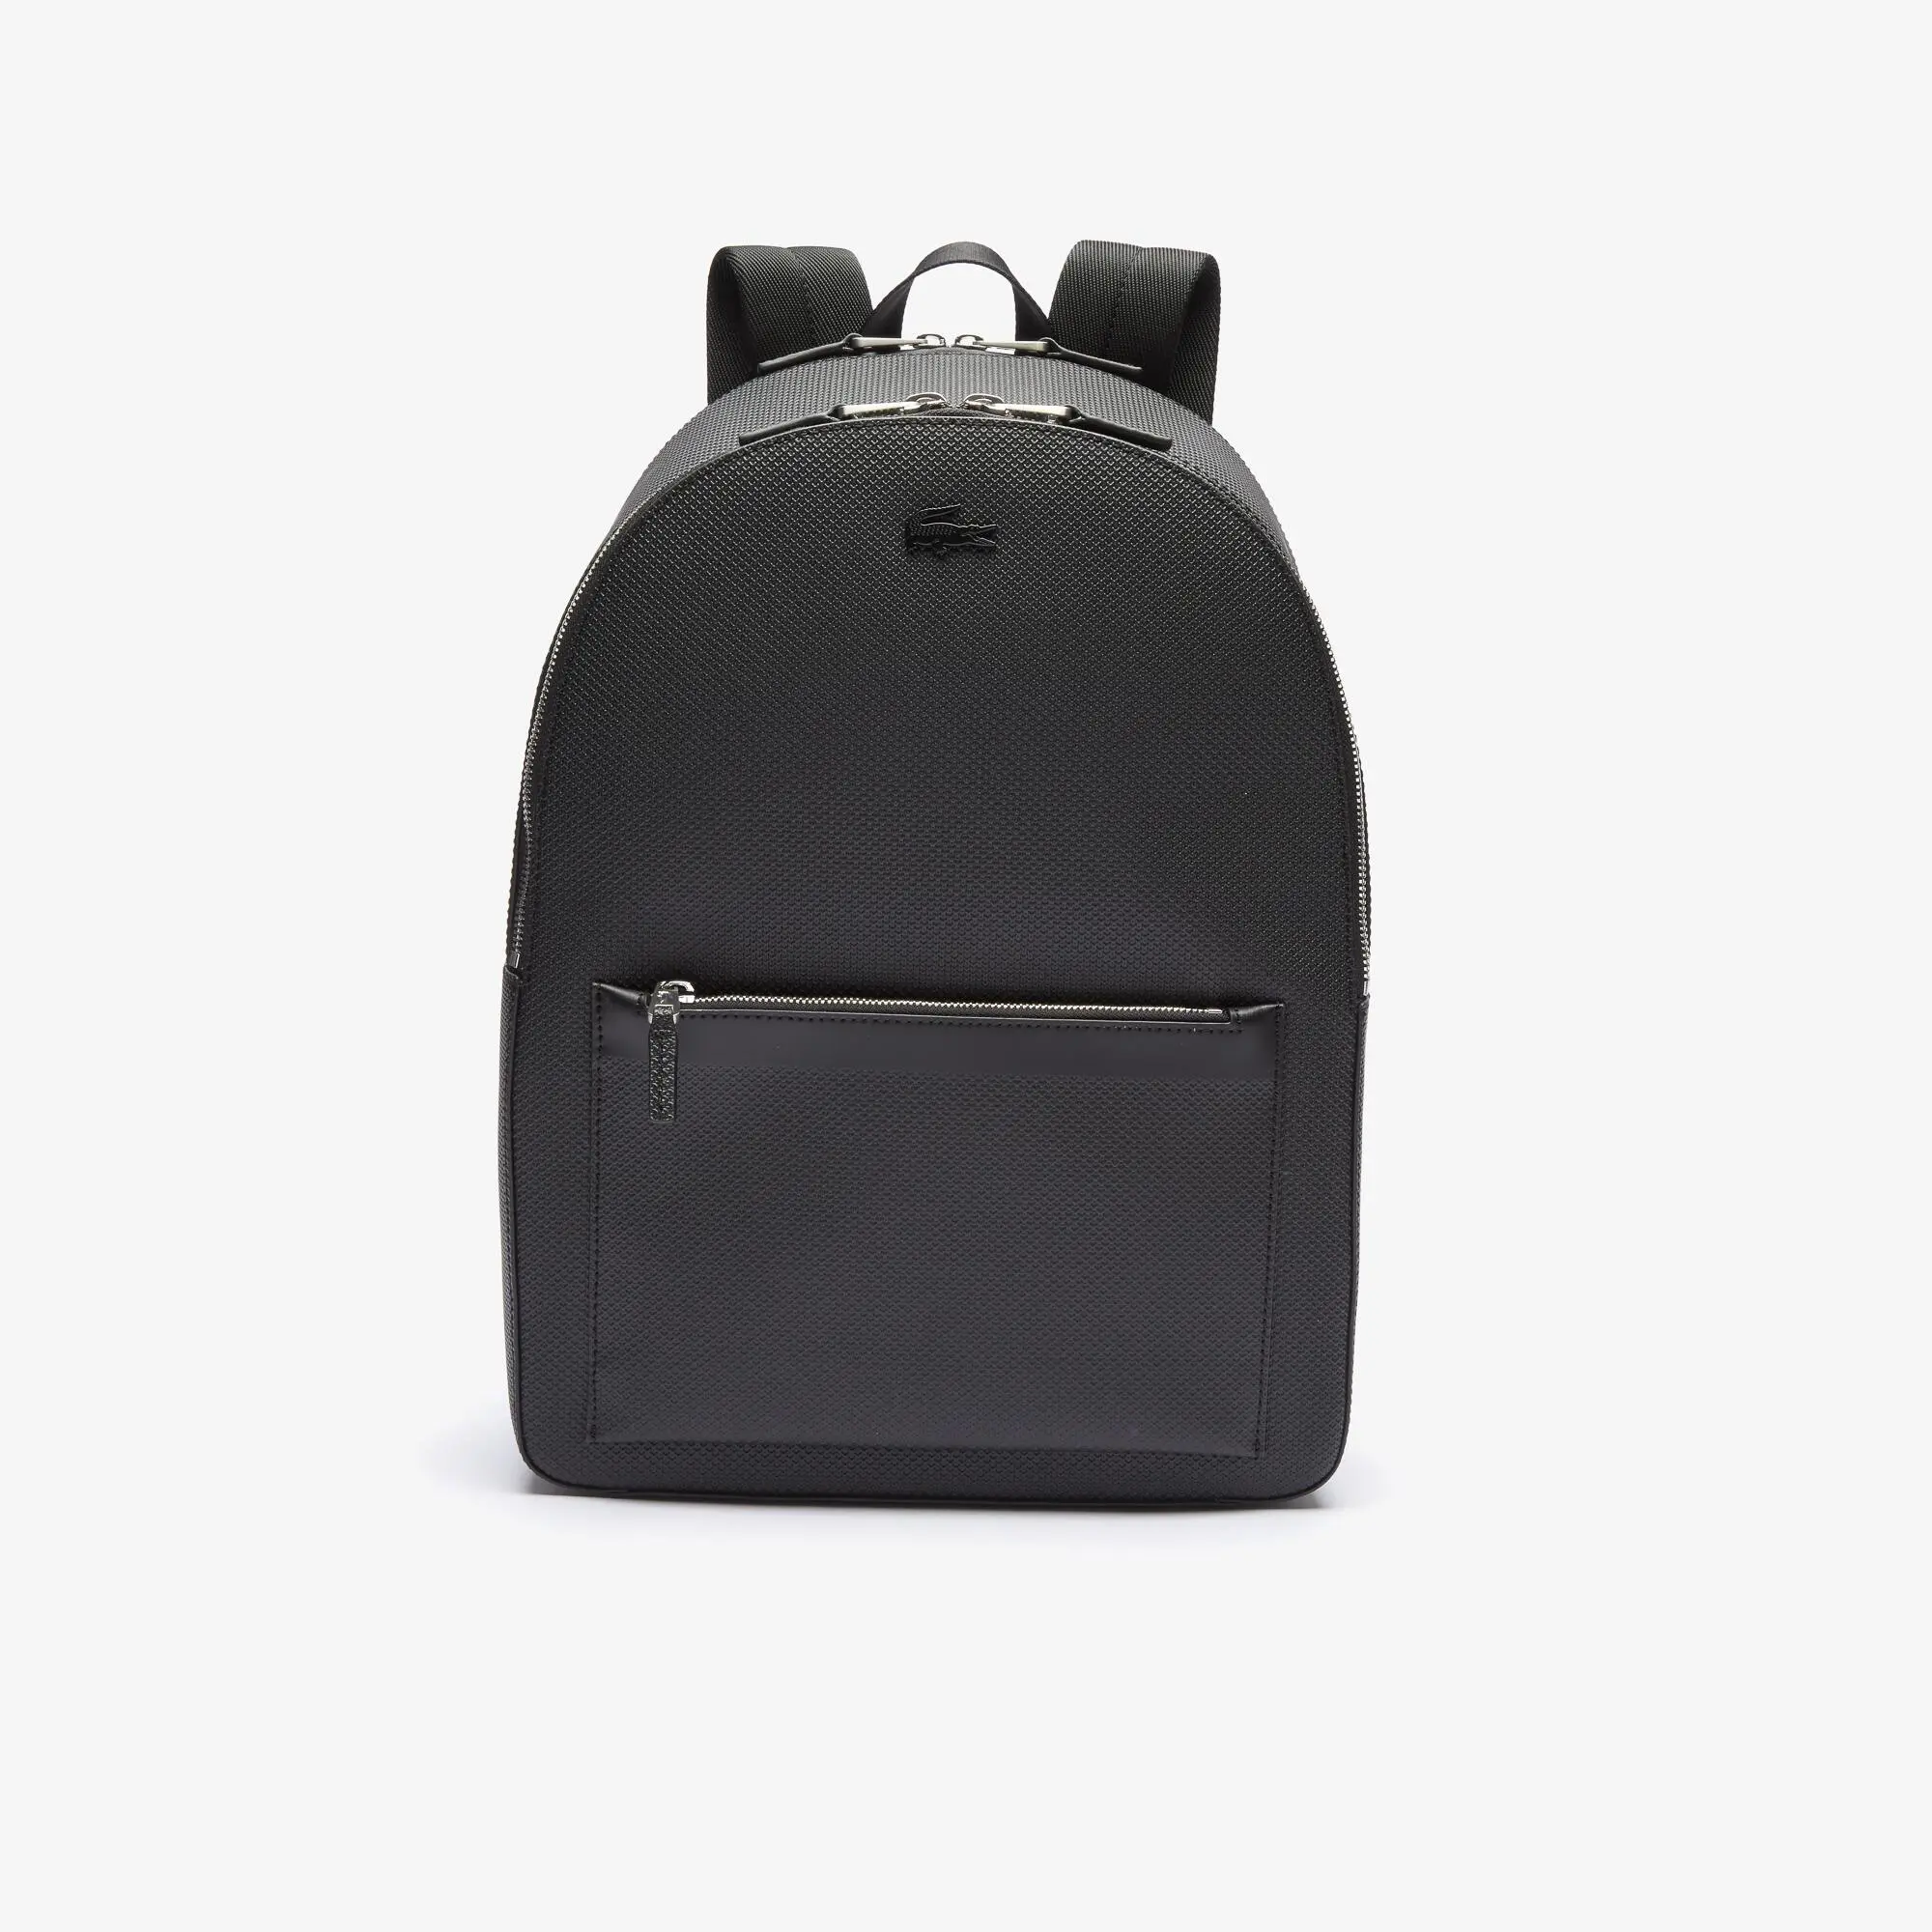 Lacoste Men's Chantaco Matte Stitched Leather Backpack. 2